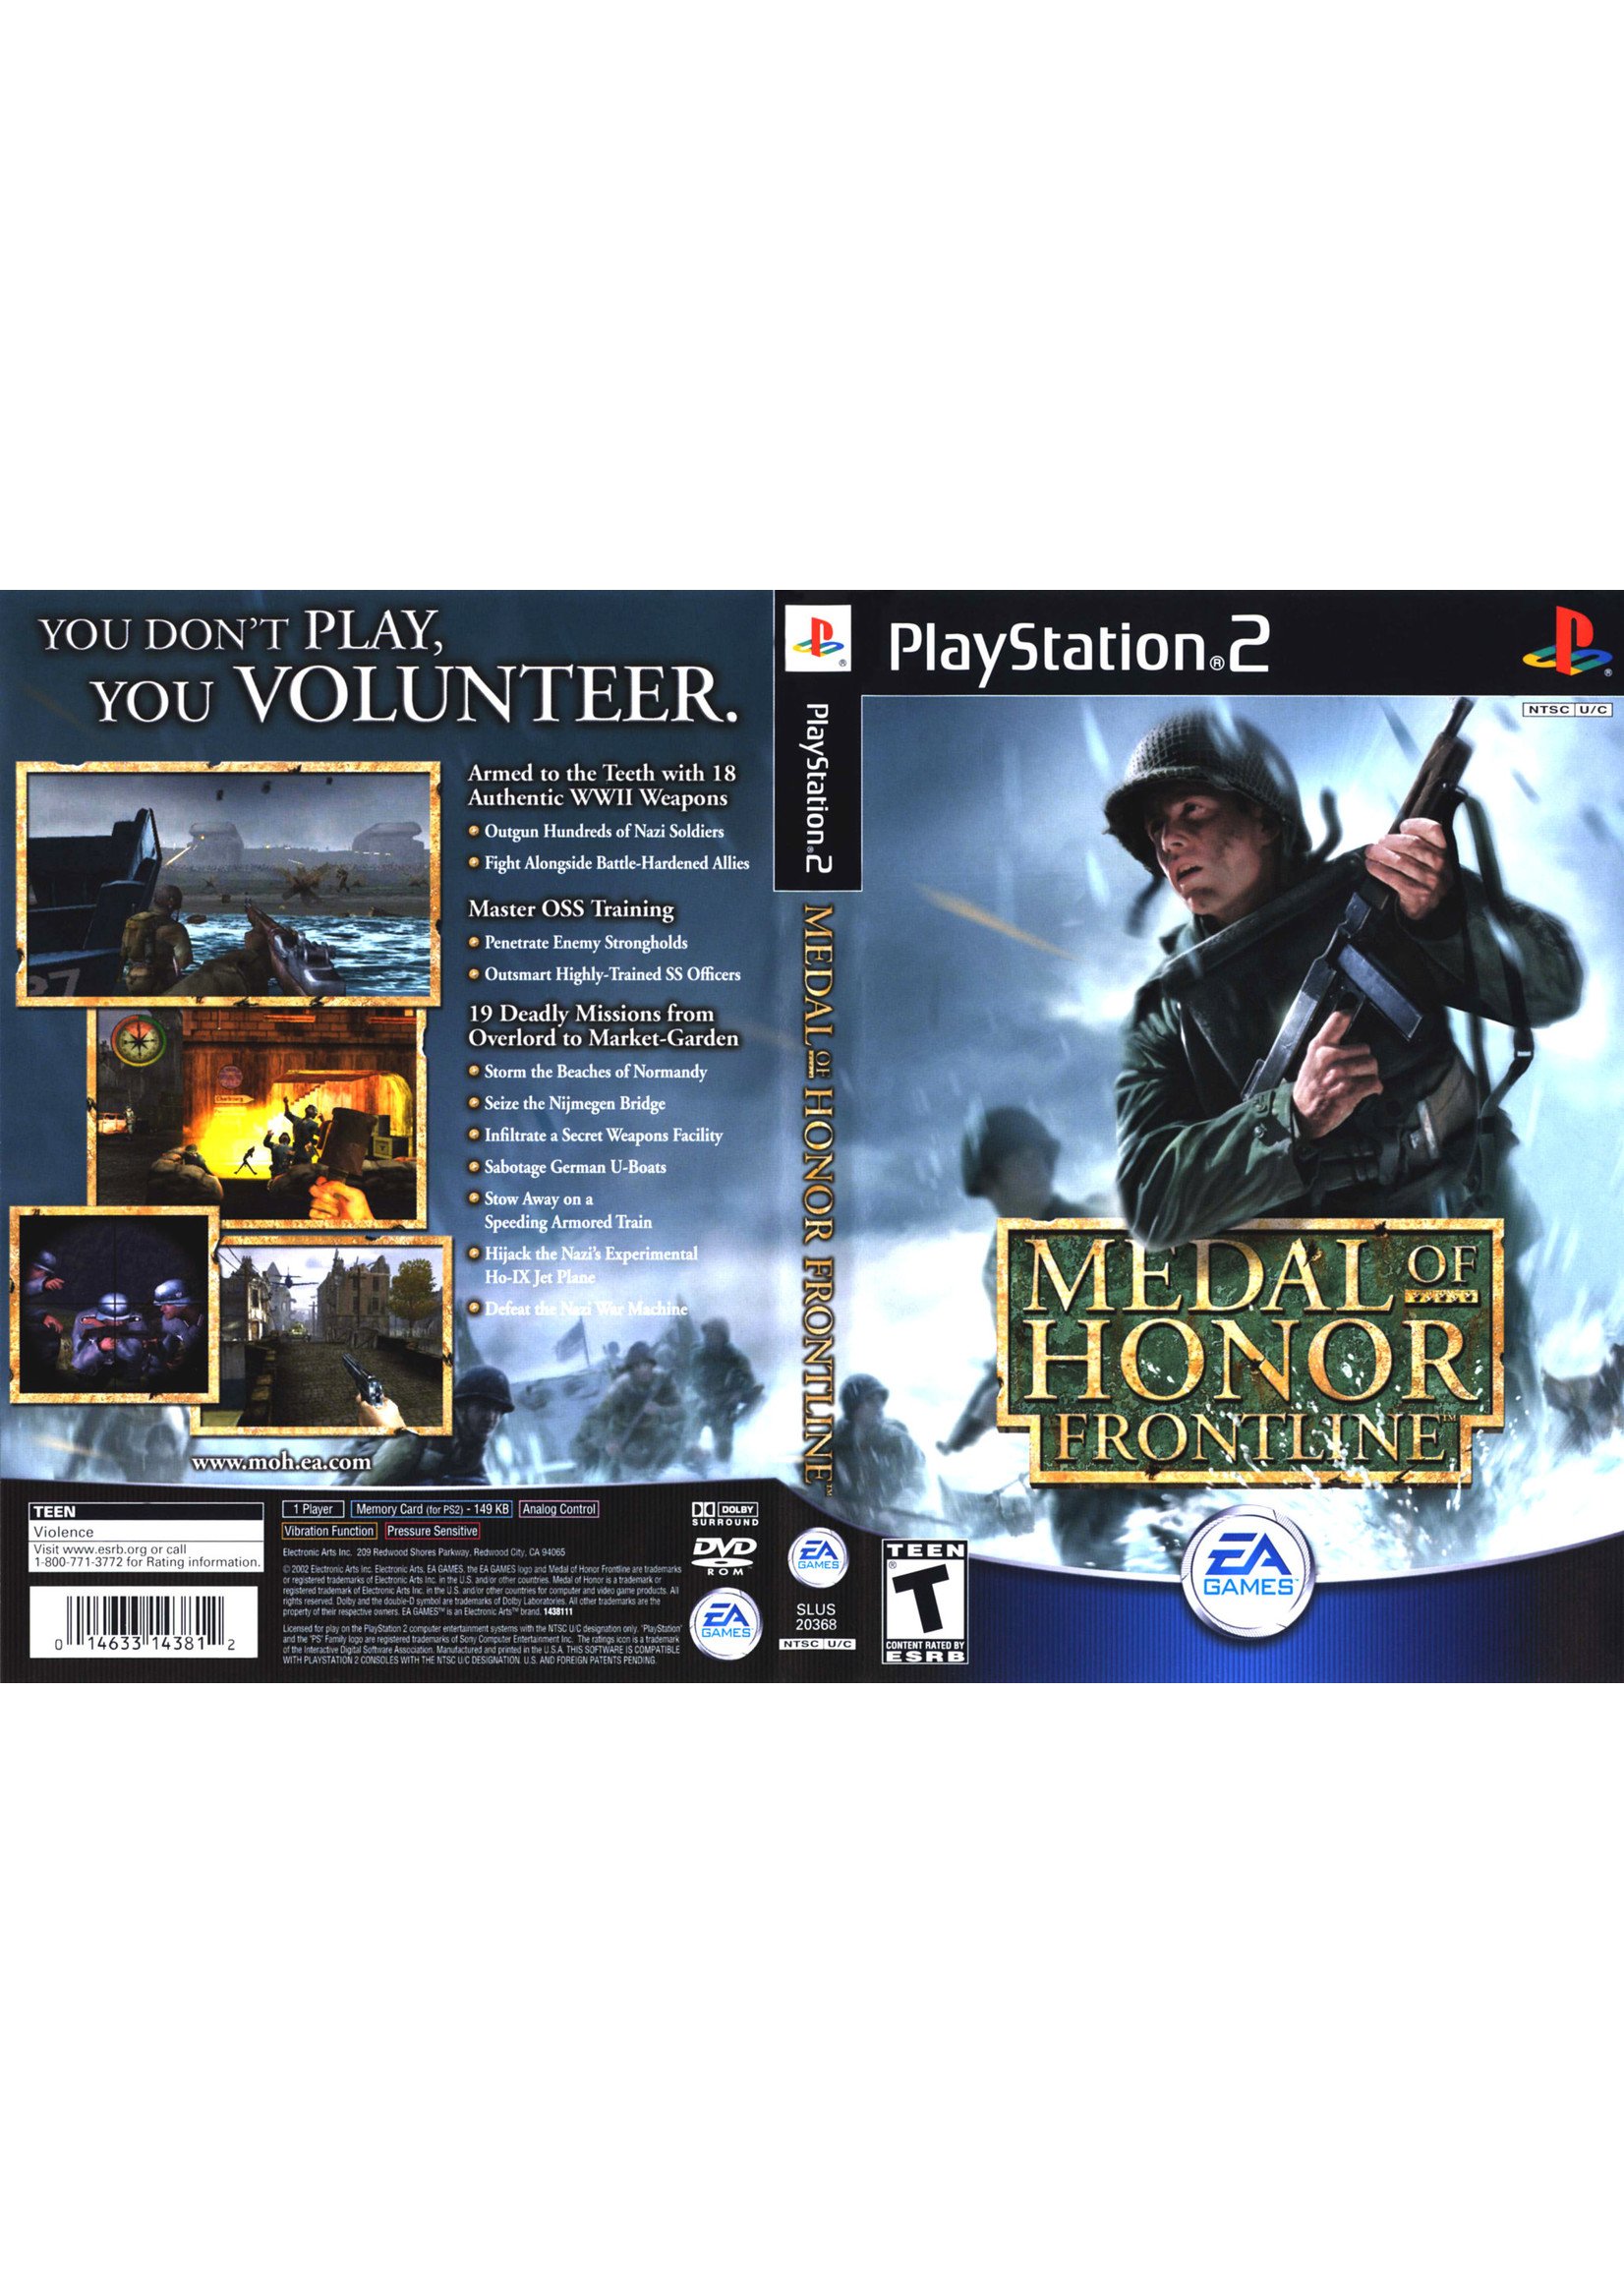 Sony Playstation 2 (PS2) Medal of Honor Frontline